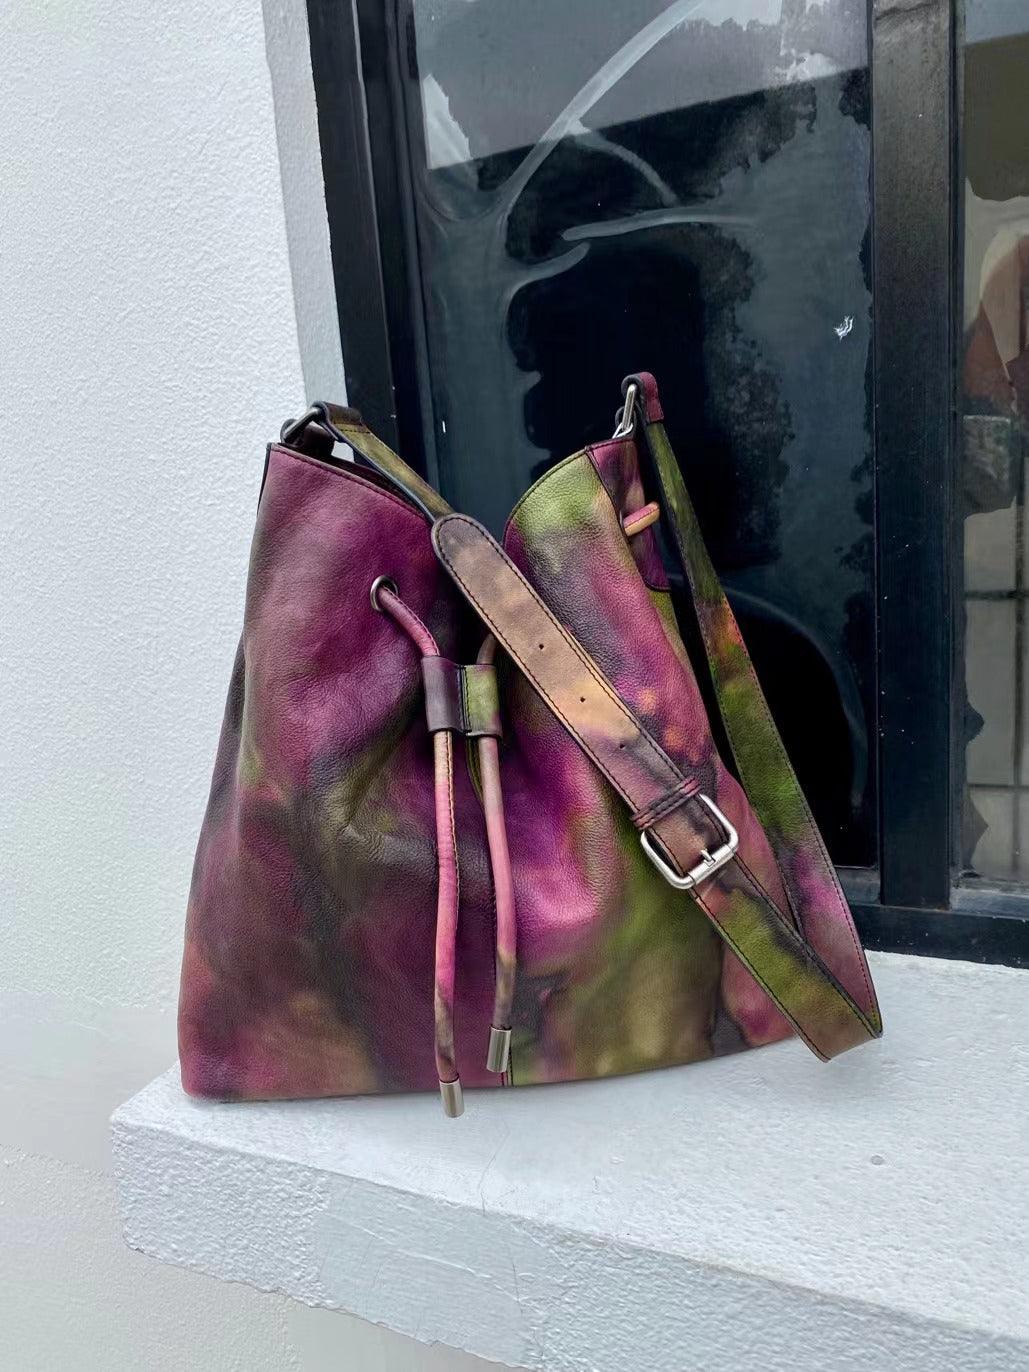 Italian Luxury Cowhide Leather Drawstring Bucket Bag in Camouflage Purple, Women Handcrafted High-End Genuine Leather Shoulder Bag - Alexel Crafts